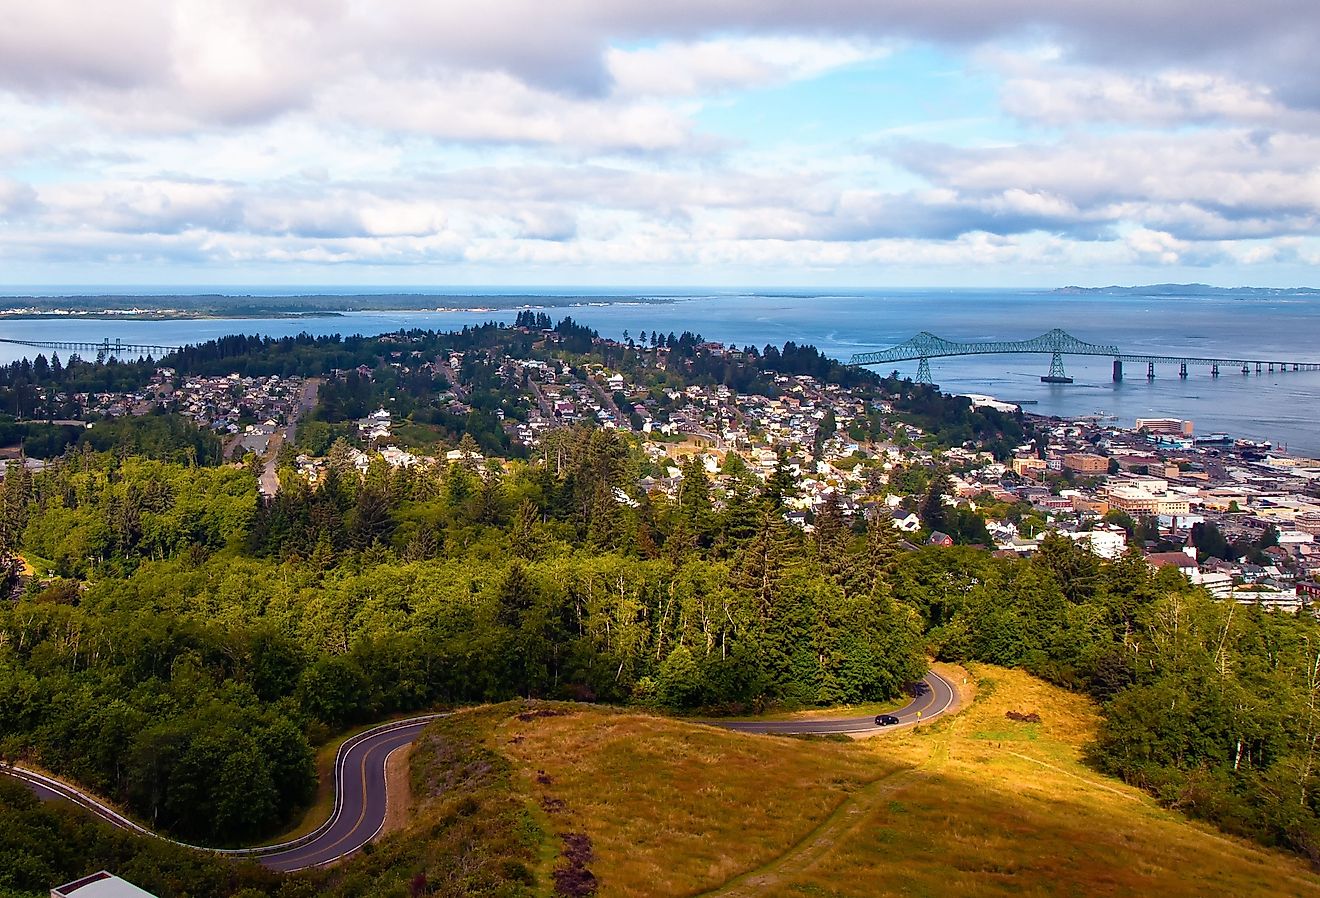 View from up high of Astoria, Oregon and the Columbia River.